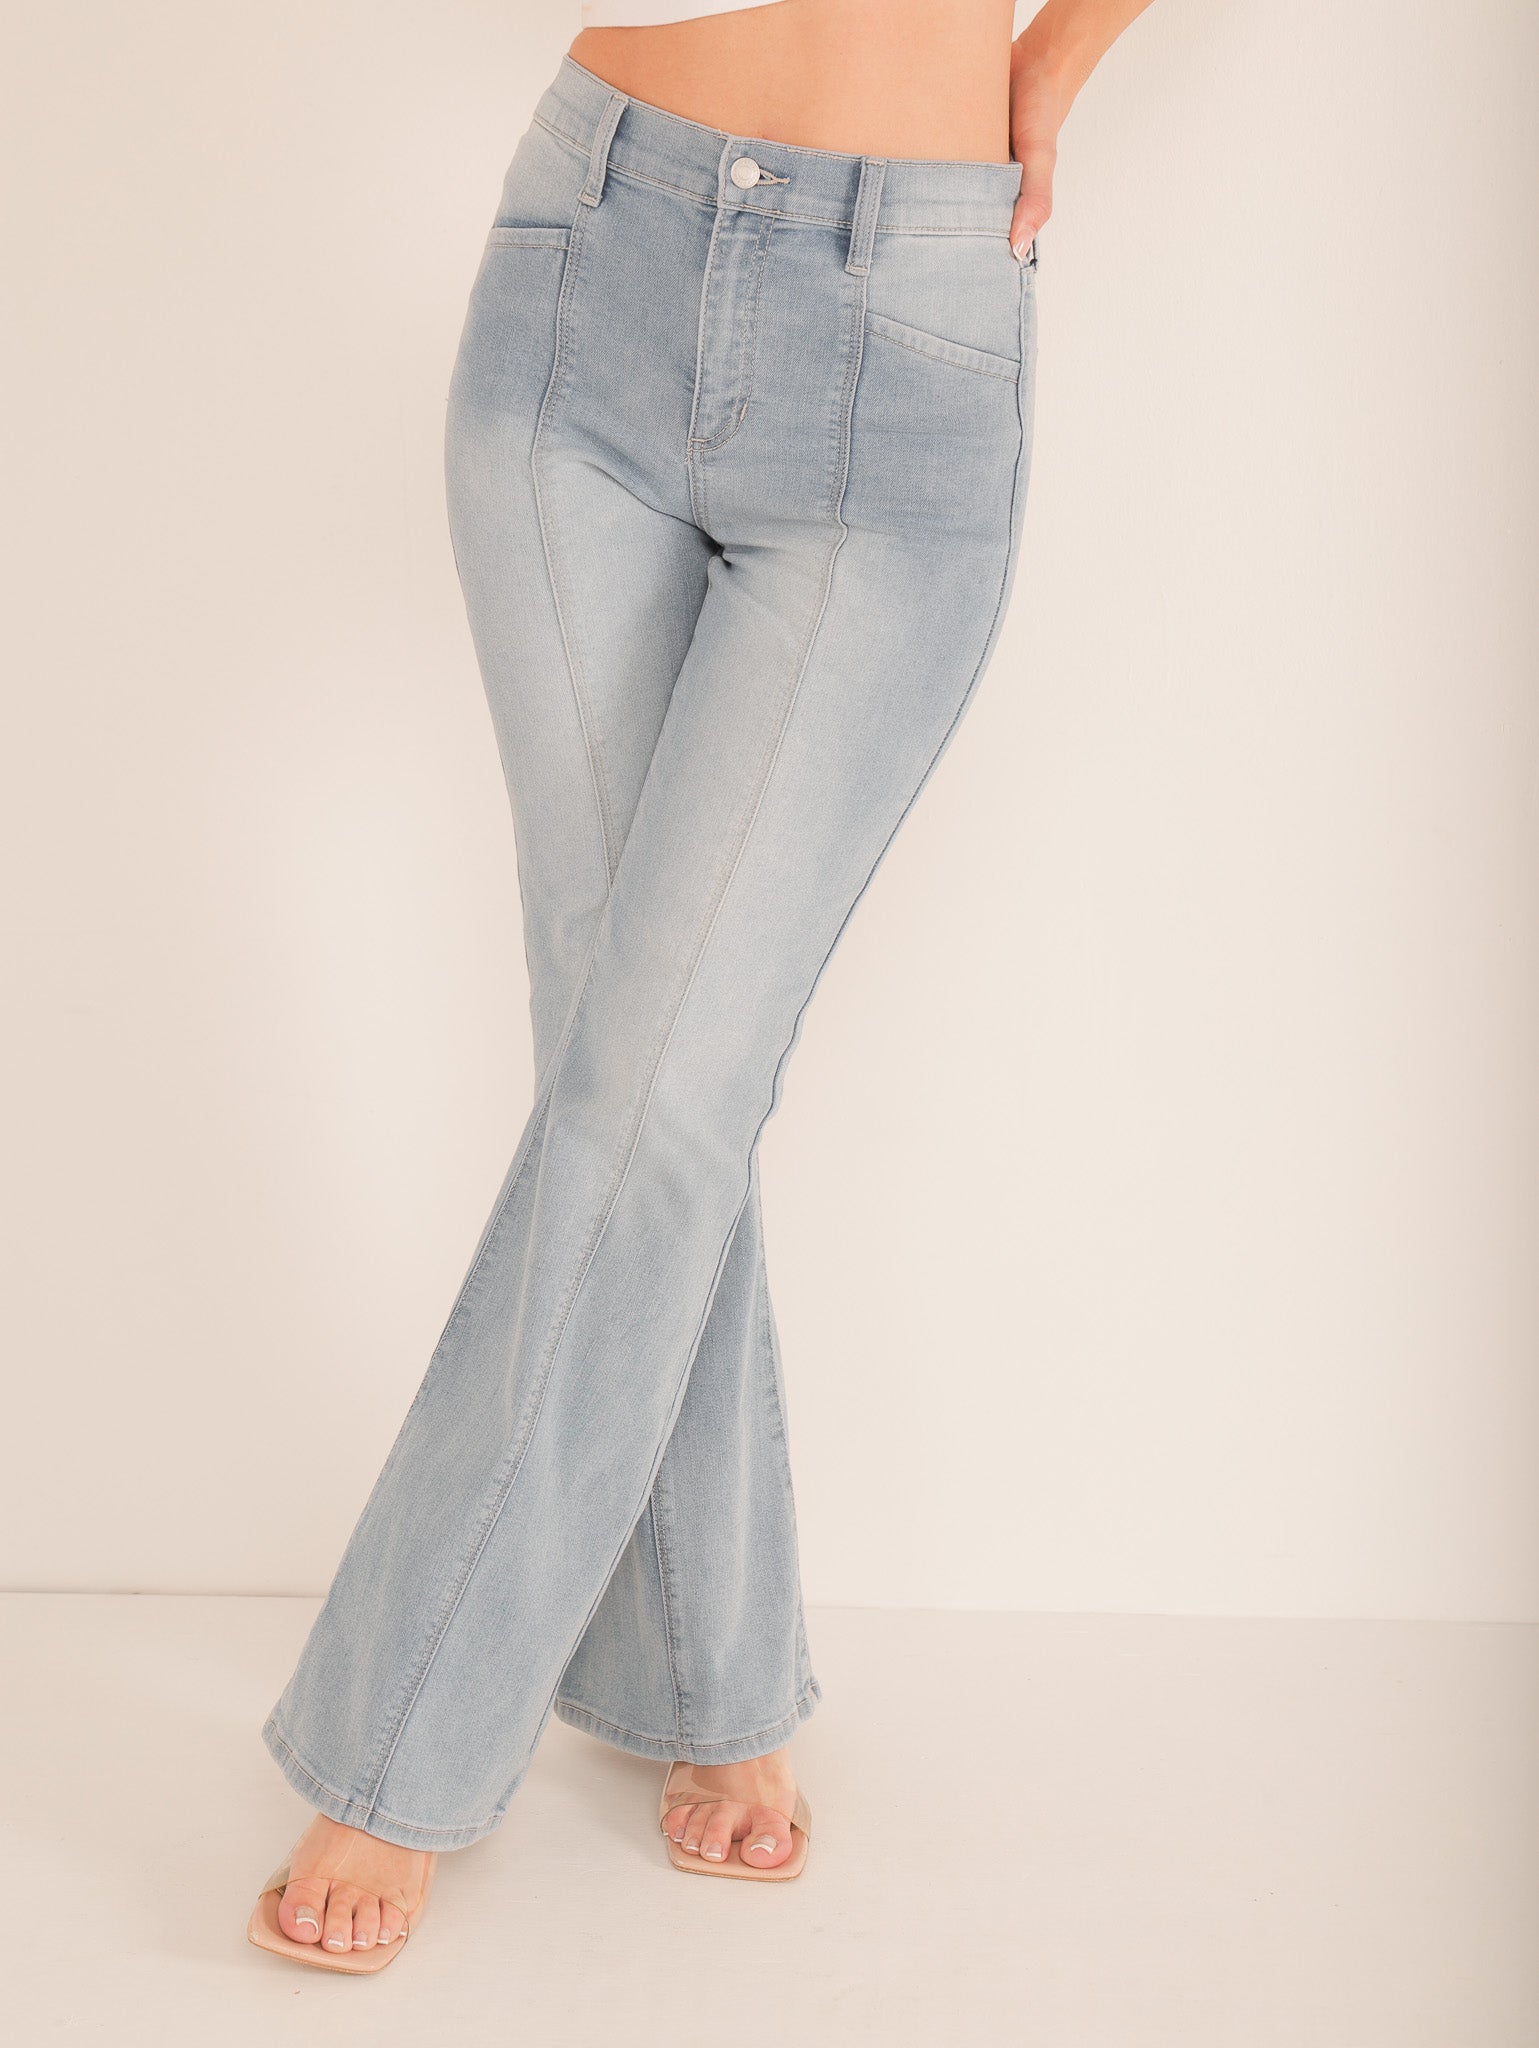 Molly Green - Call Me Maybe Flare Jeans - Denim